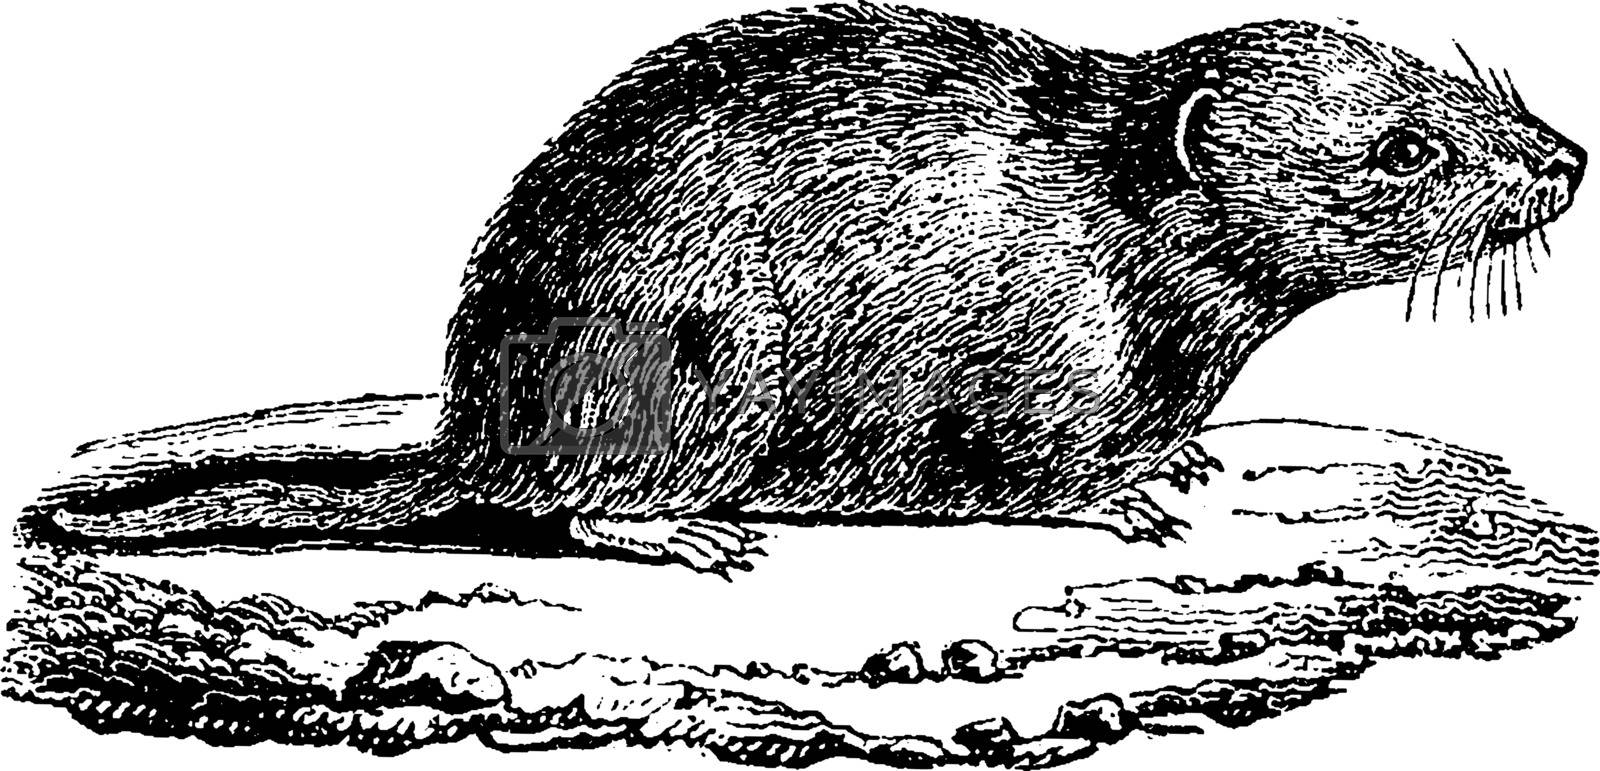 Royalty free image of Common vole, vintage engraving. by Morphart